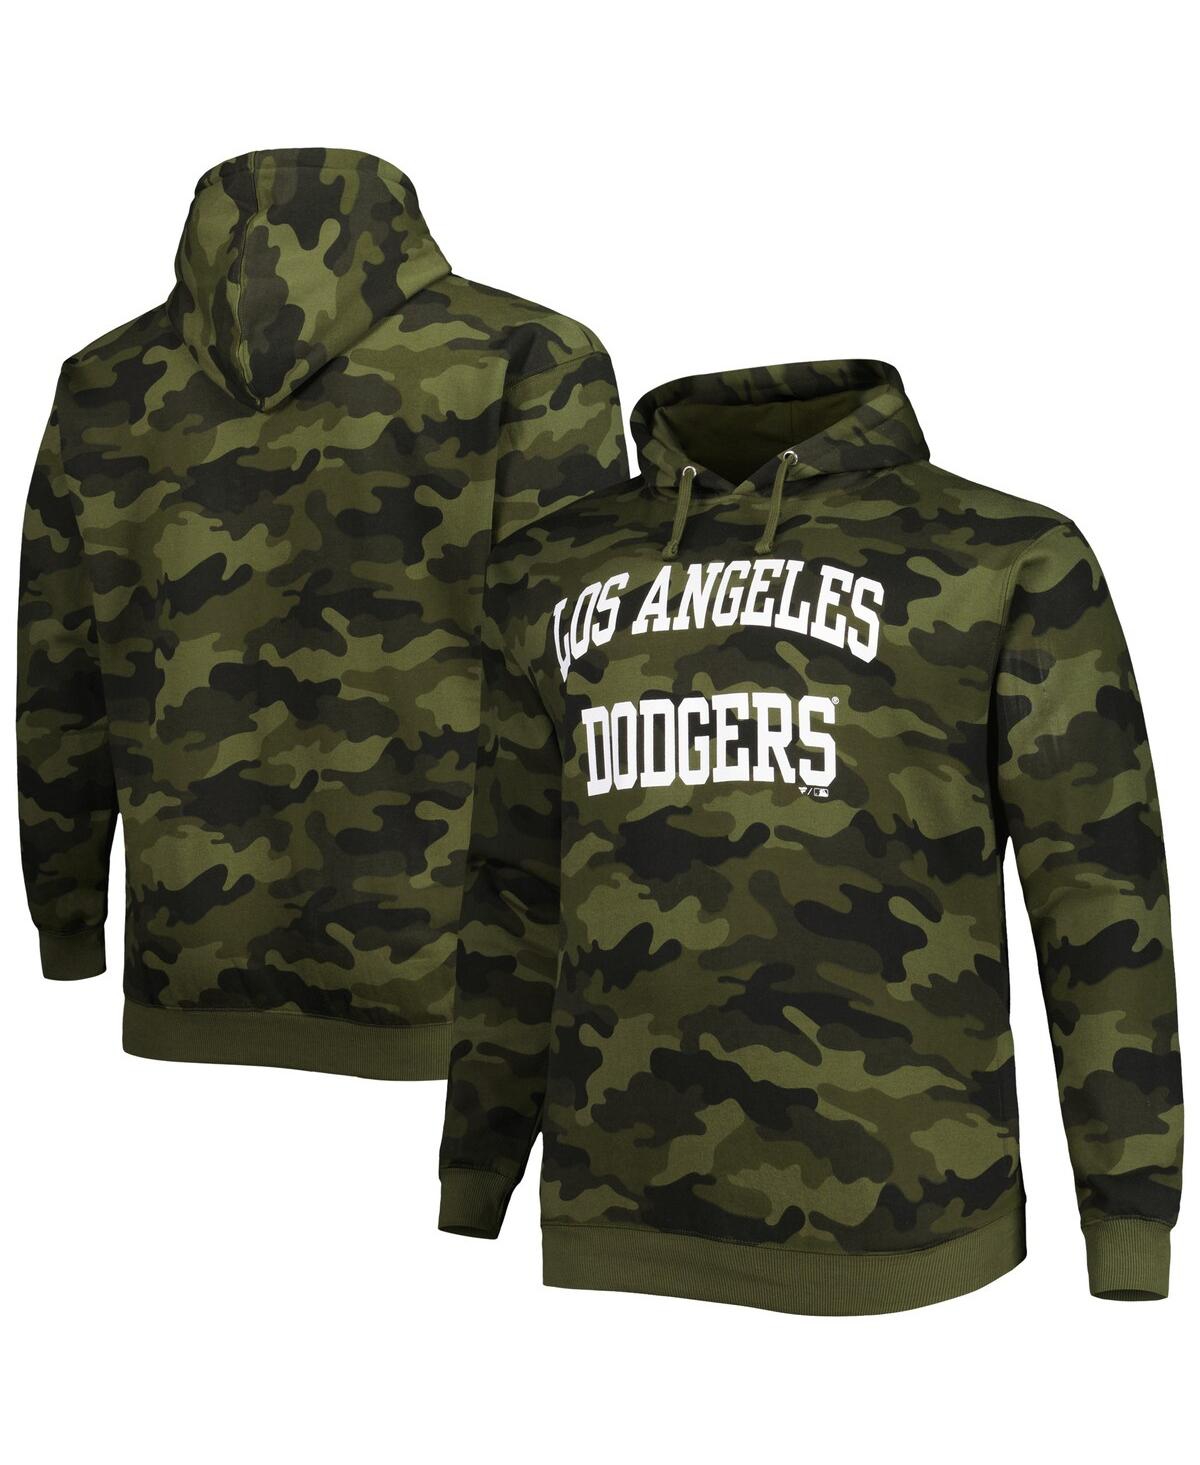 Men's Camo Los Angeles Dodgers Allover Print Big and Tall Pullover Hoodie - Camo